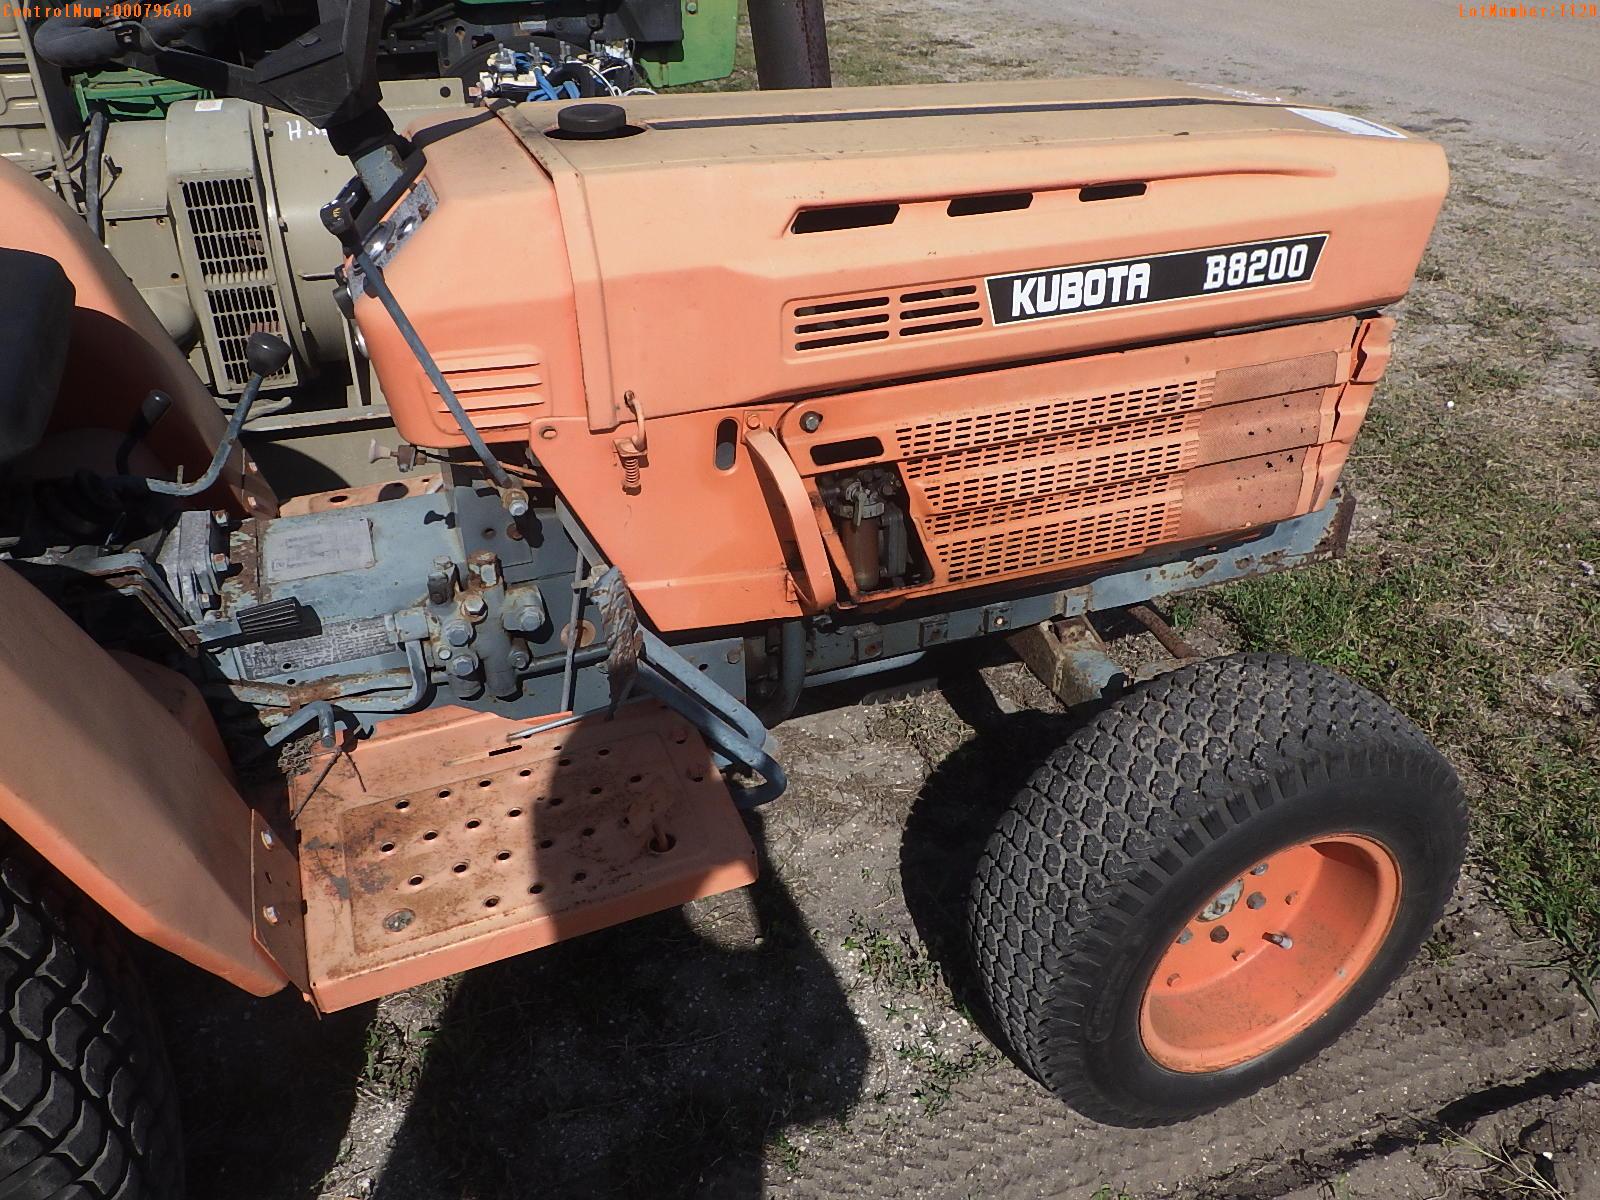 5-01120 (Equip.-Tractor)  Seller:Private/Dealer KUBOTA B8200 TRACTOR WITH LANDPR